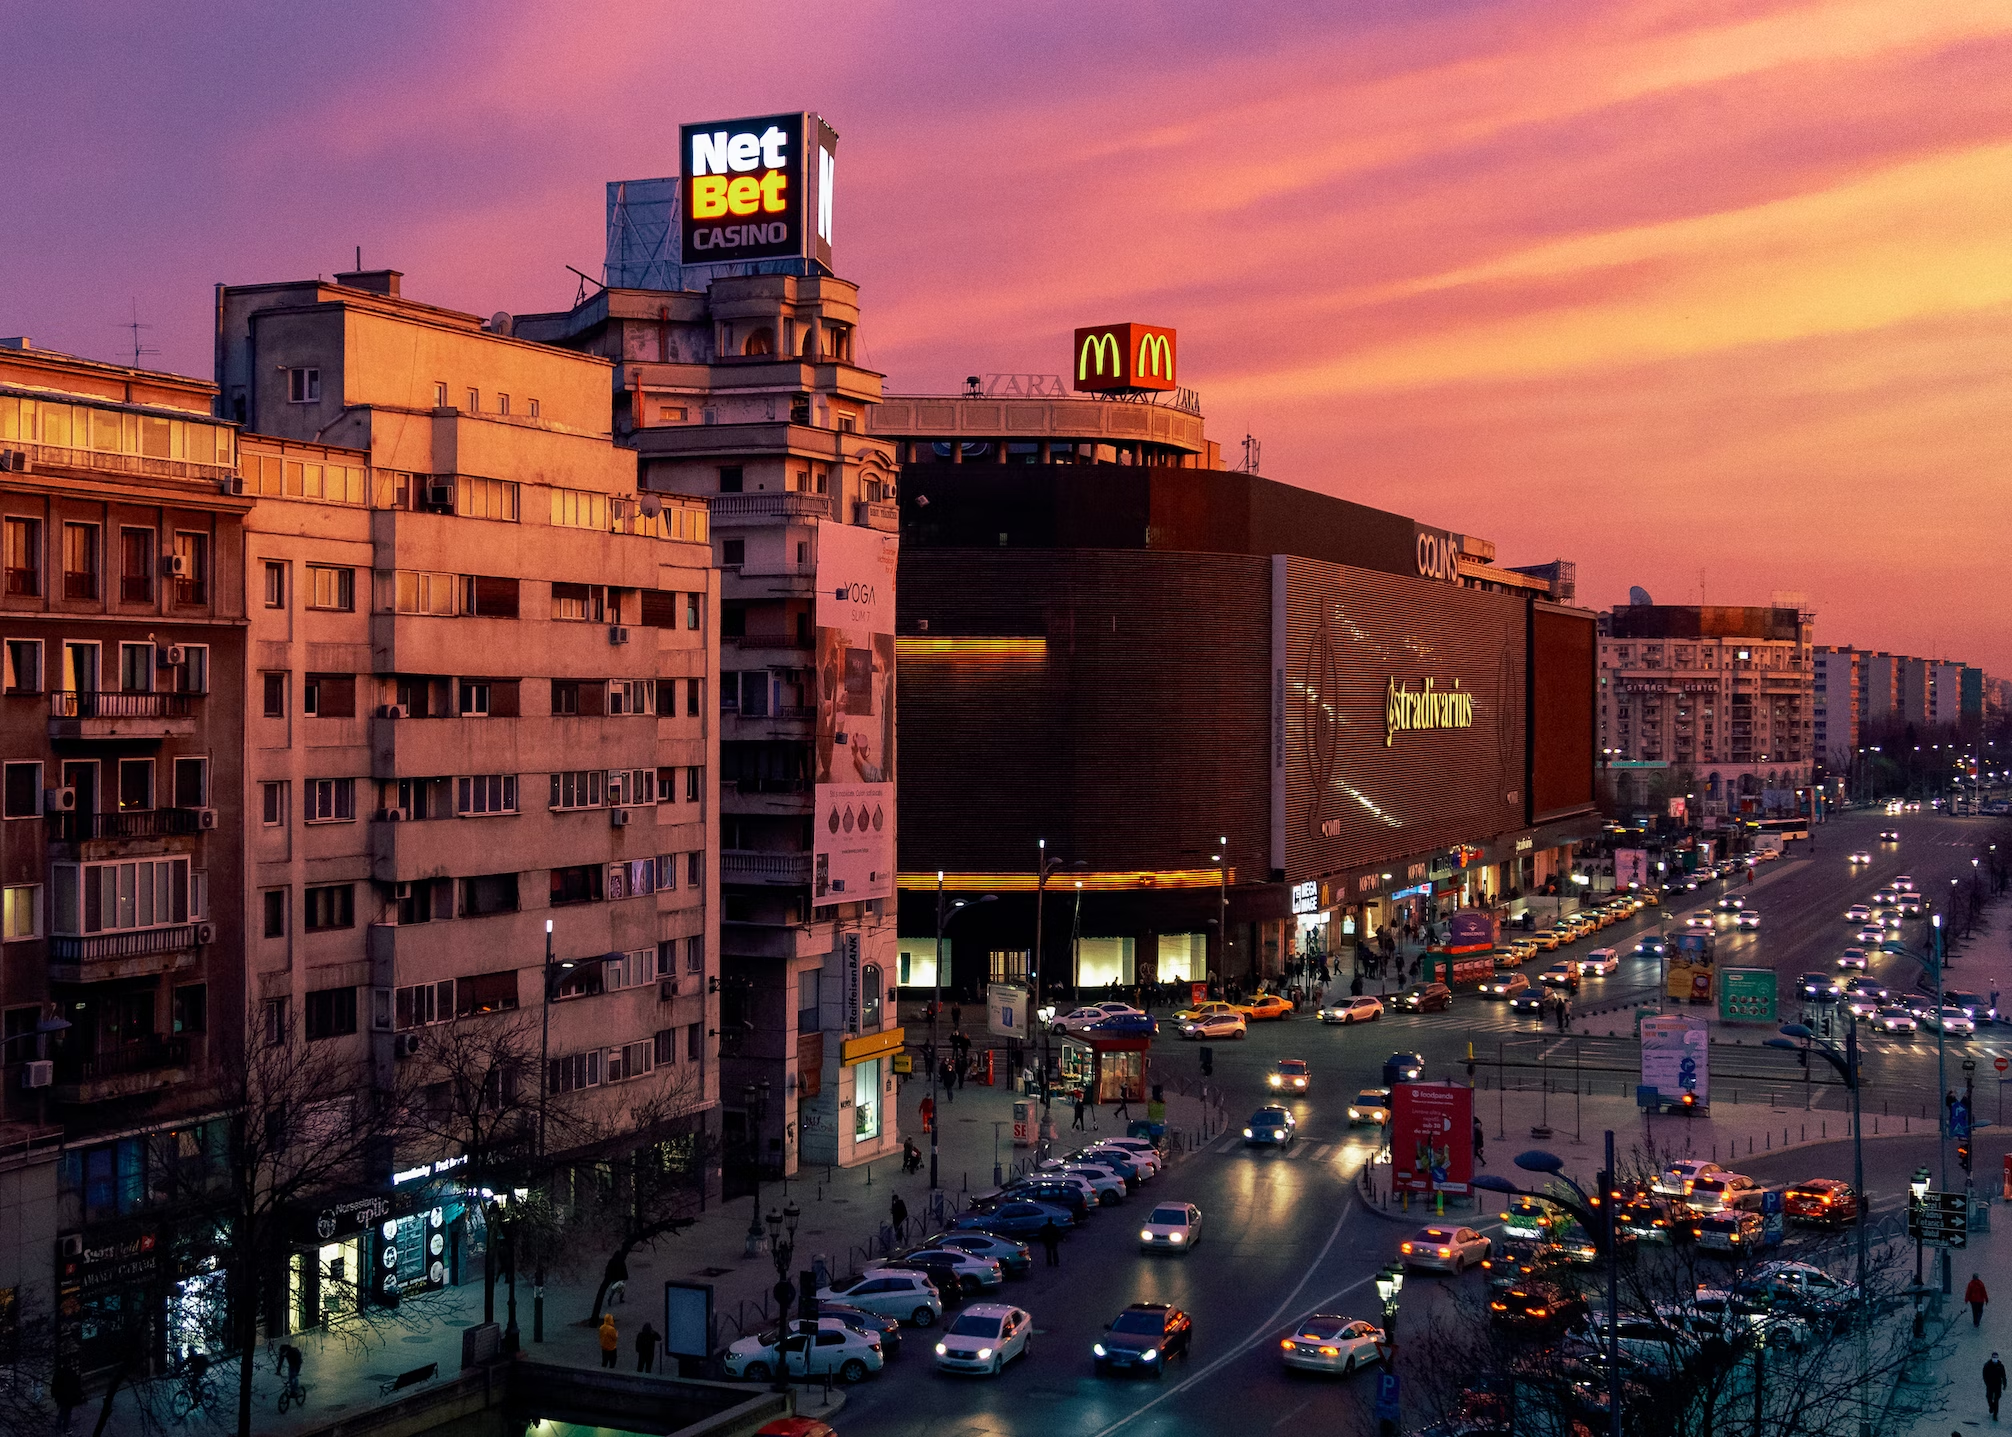 Bucharest is one of cities in Eastern Europe